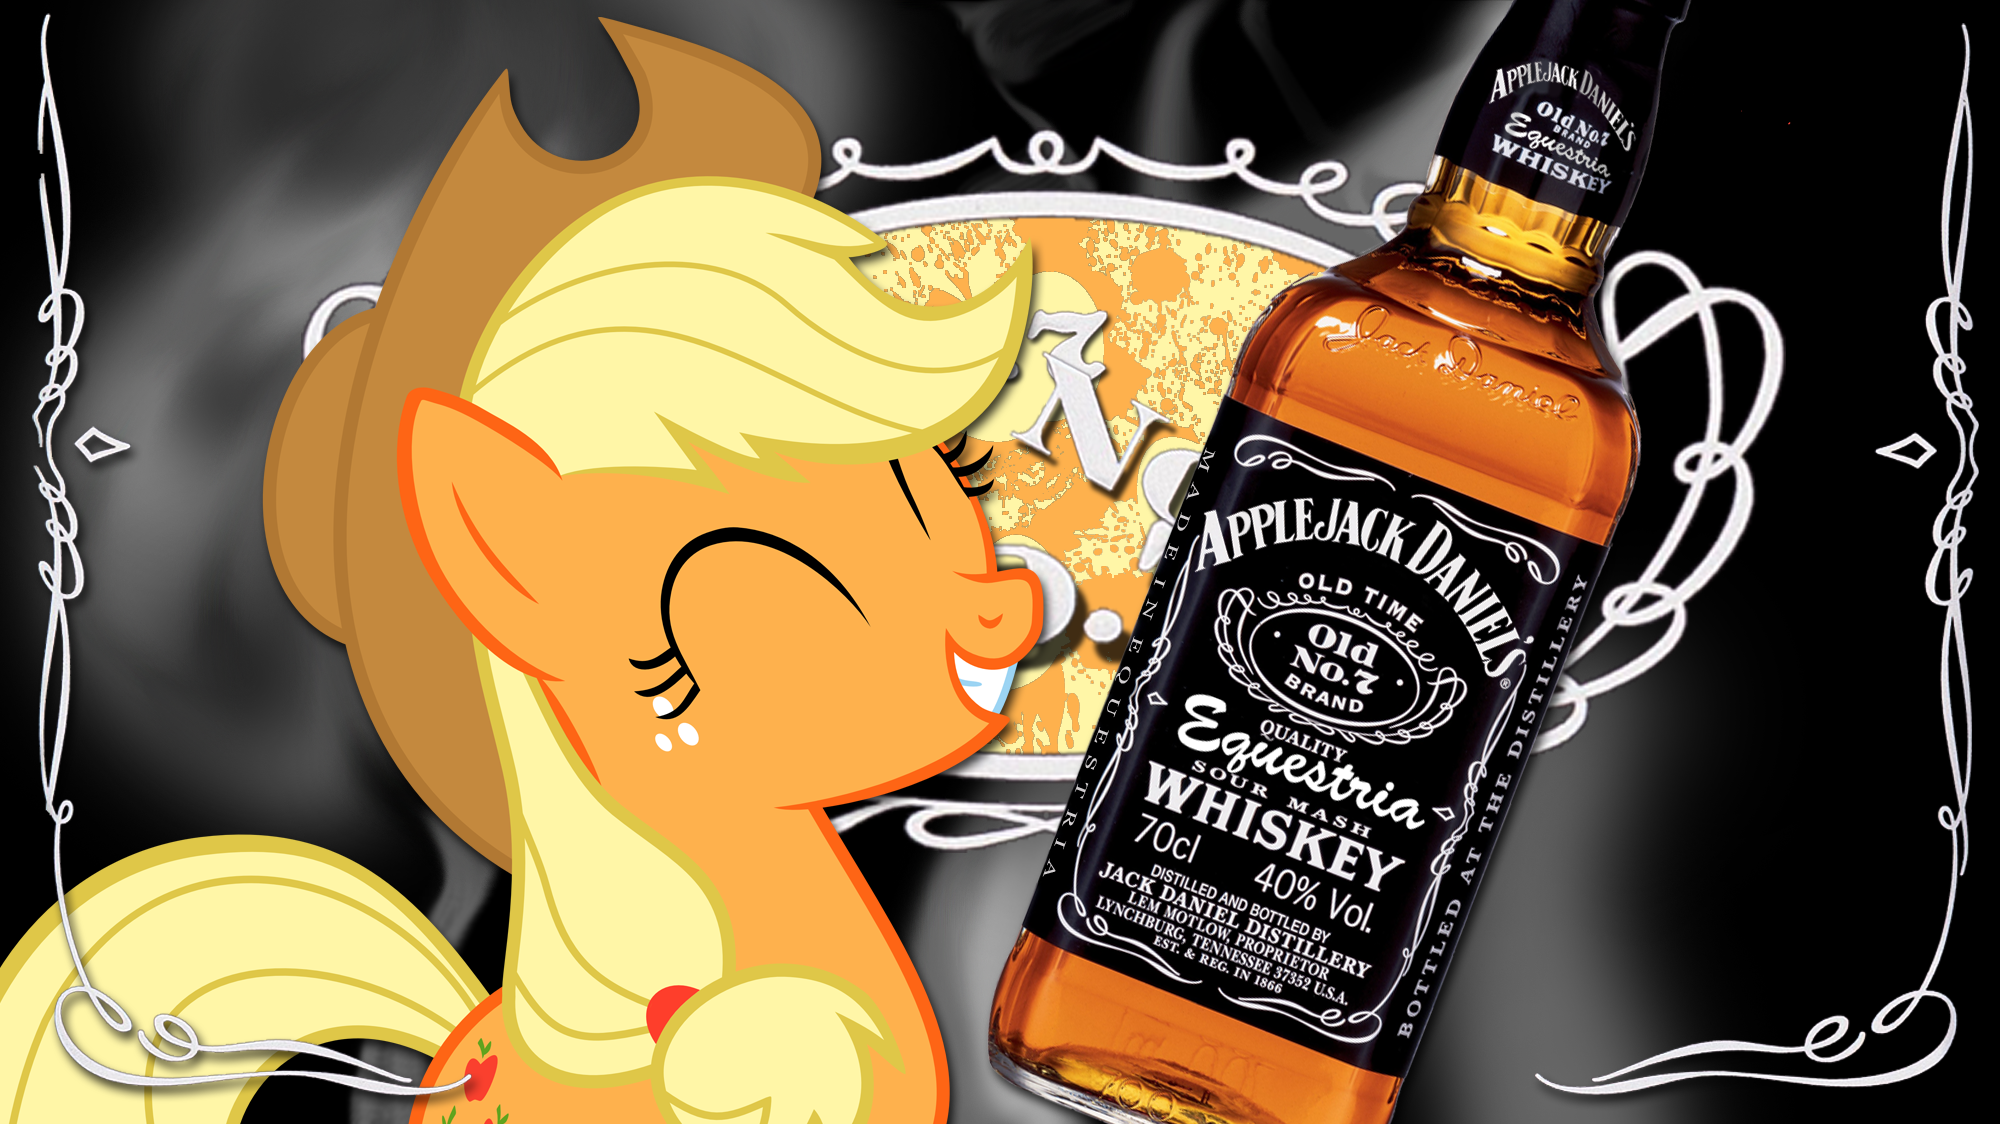 What Do Ponies Drink? - Applejack by 4Suit and Drakefire3k